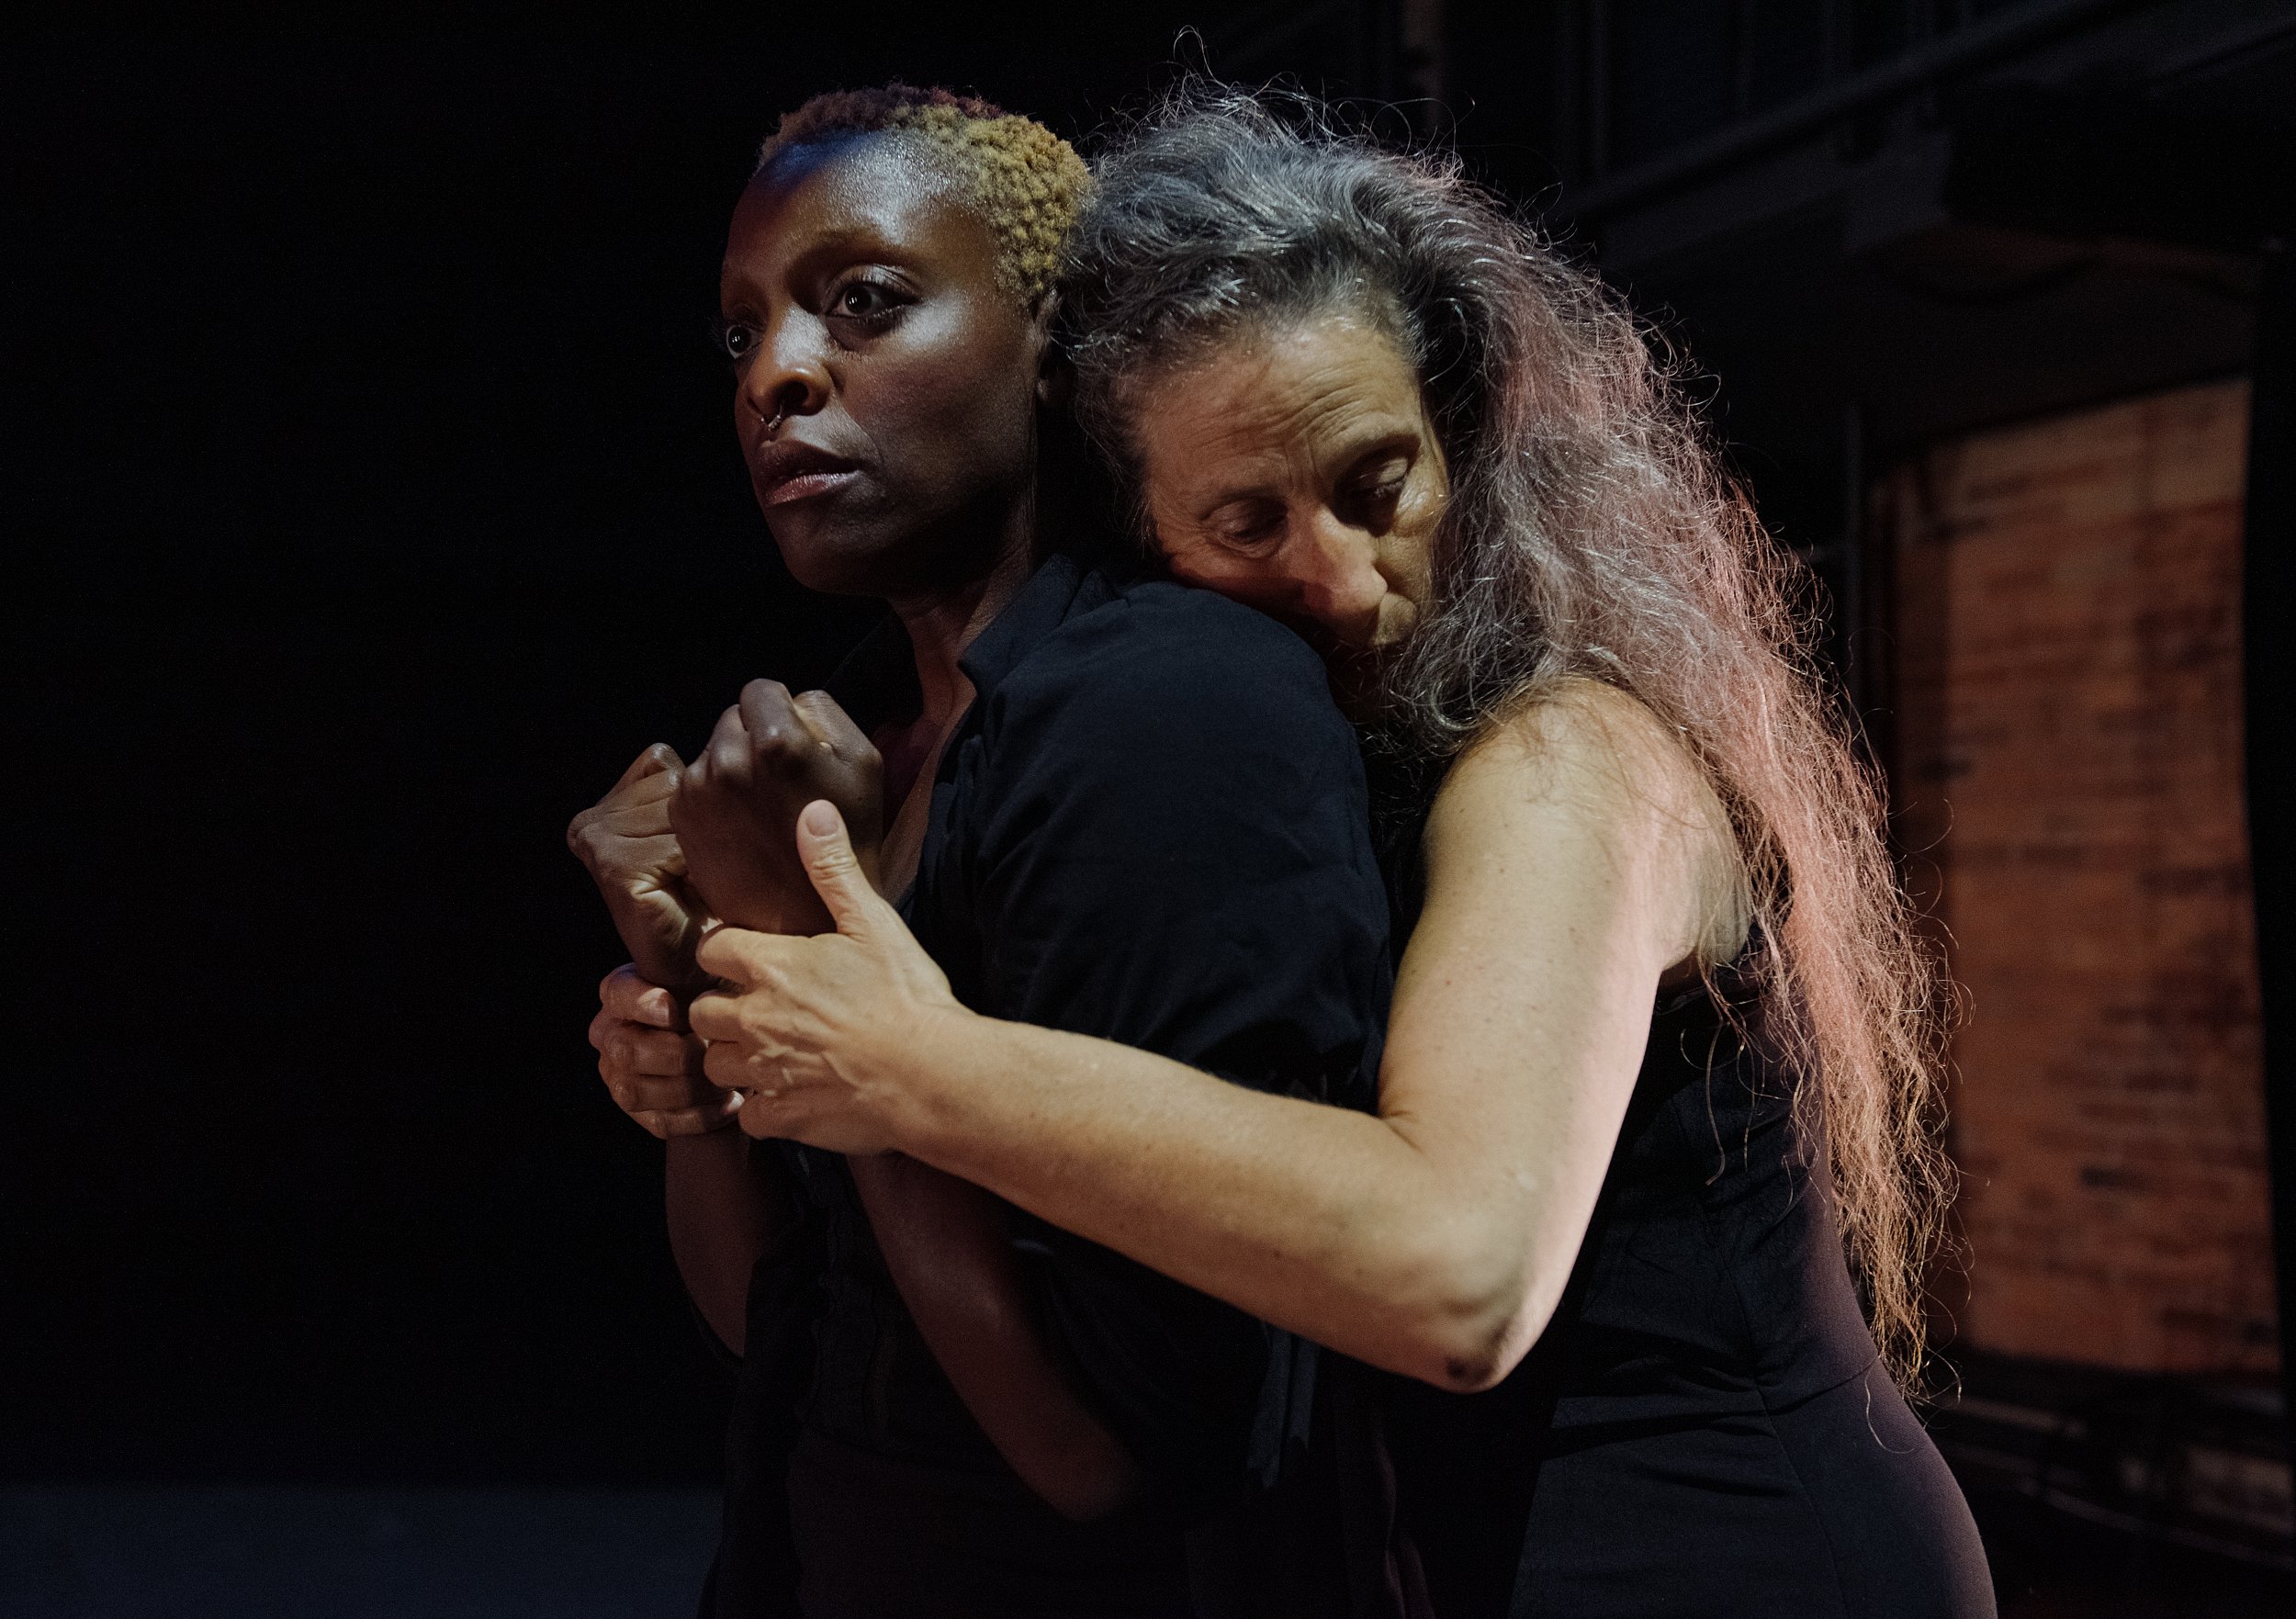  Karen Kaeja, an Ashkenazi white female with long grey hair gently embraces Nickeshia Garrick, a Queer, Afro-Caribbean Canadian artist with short kinky blonde hair. Karen has her eyes closed and holds Nickeshia’s upright fists. 